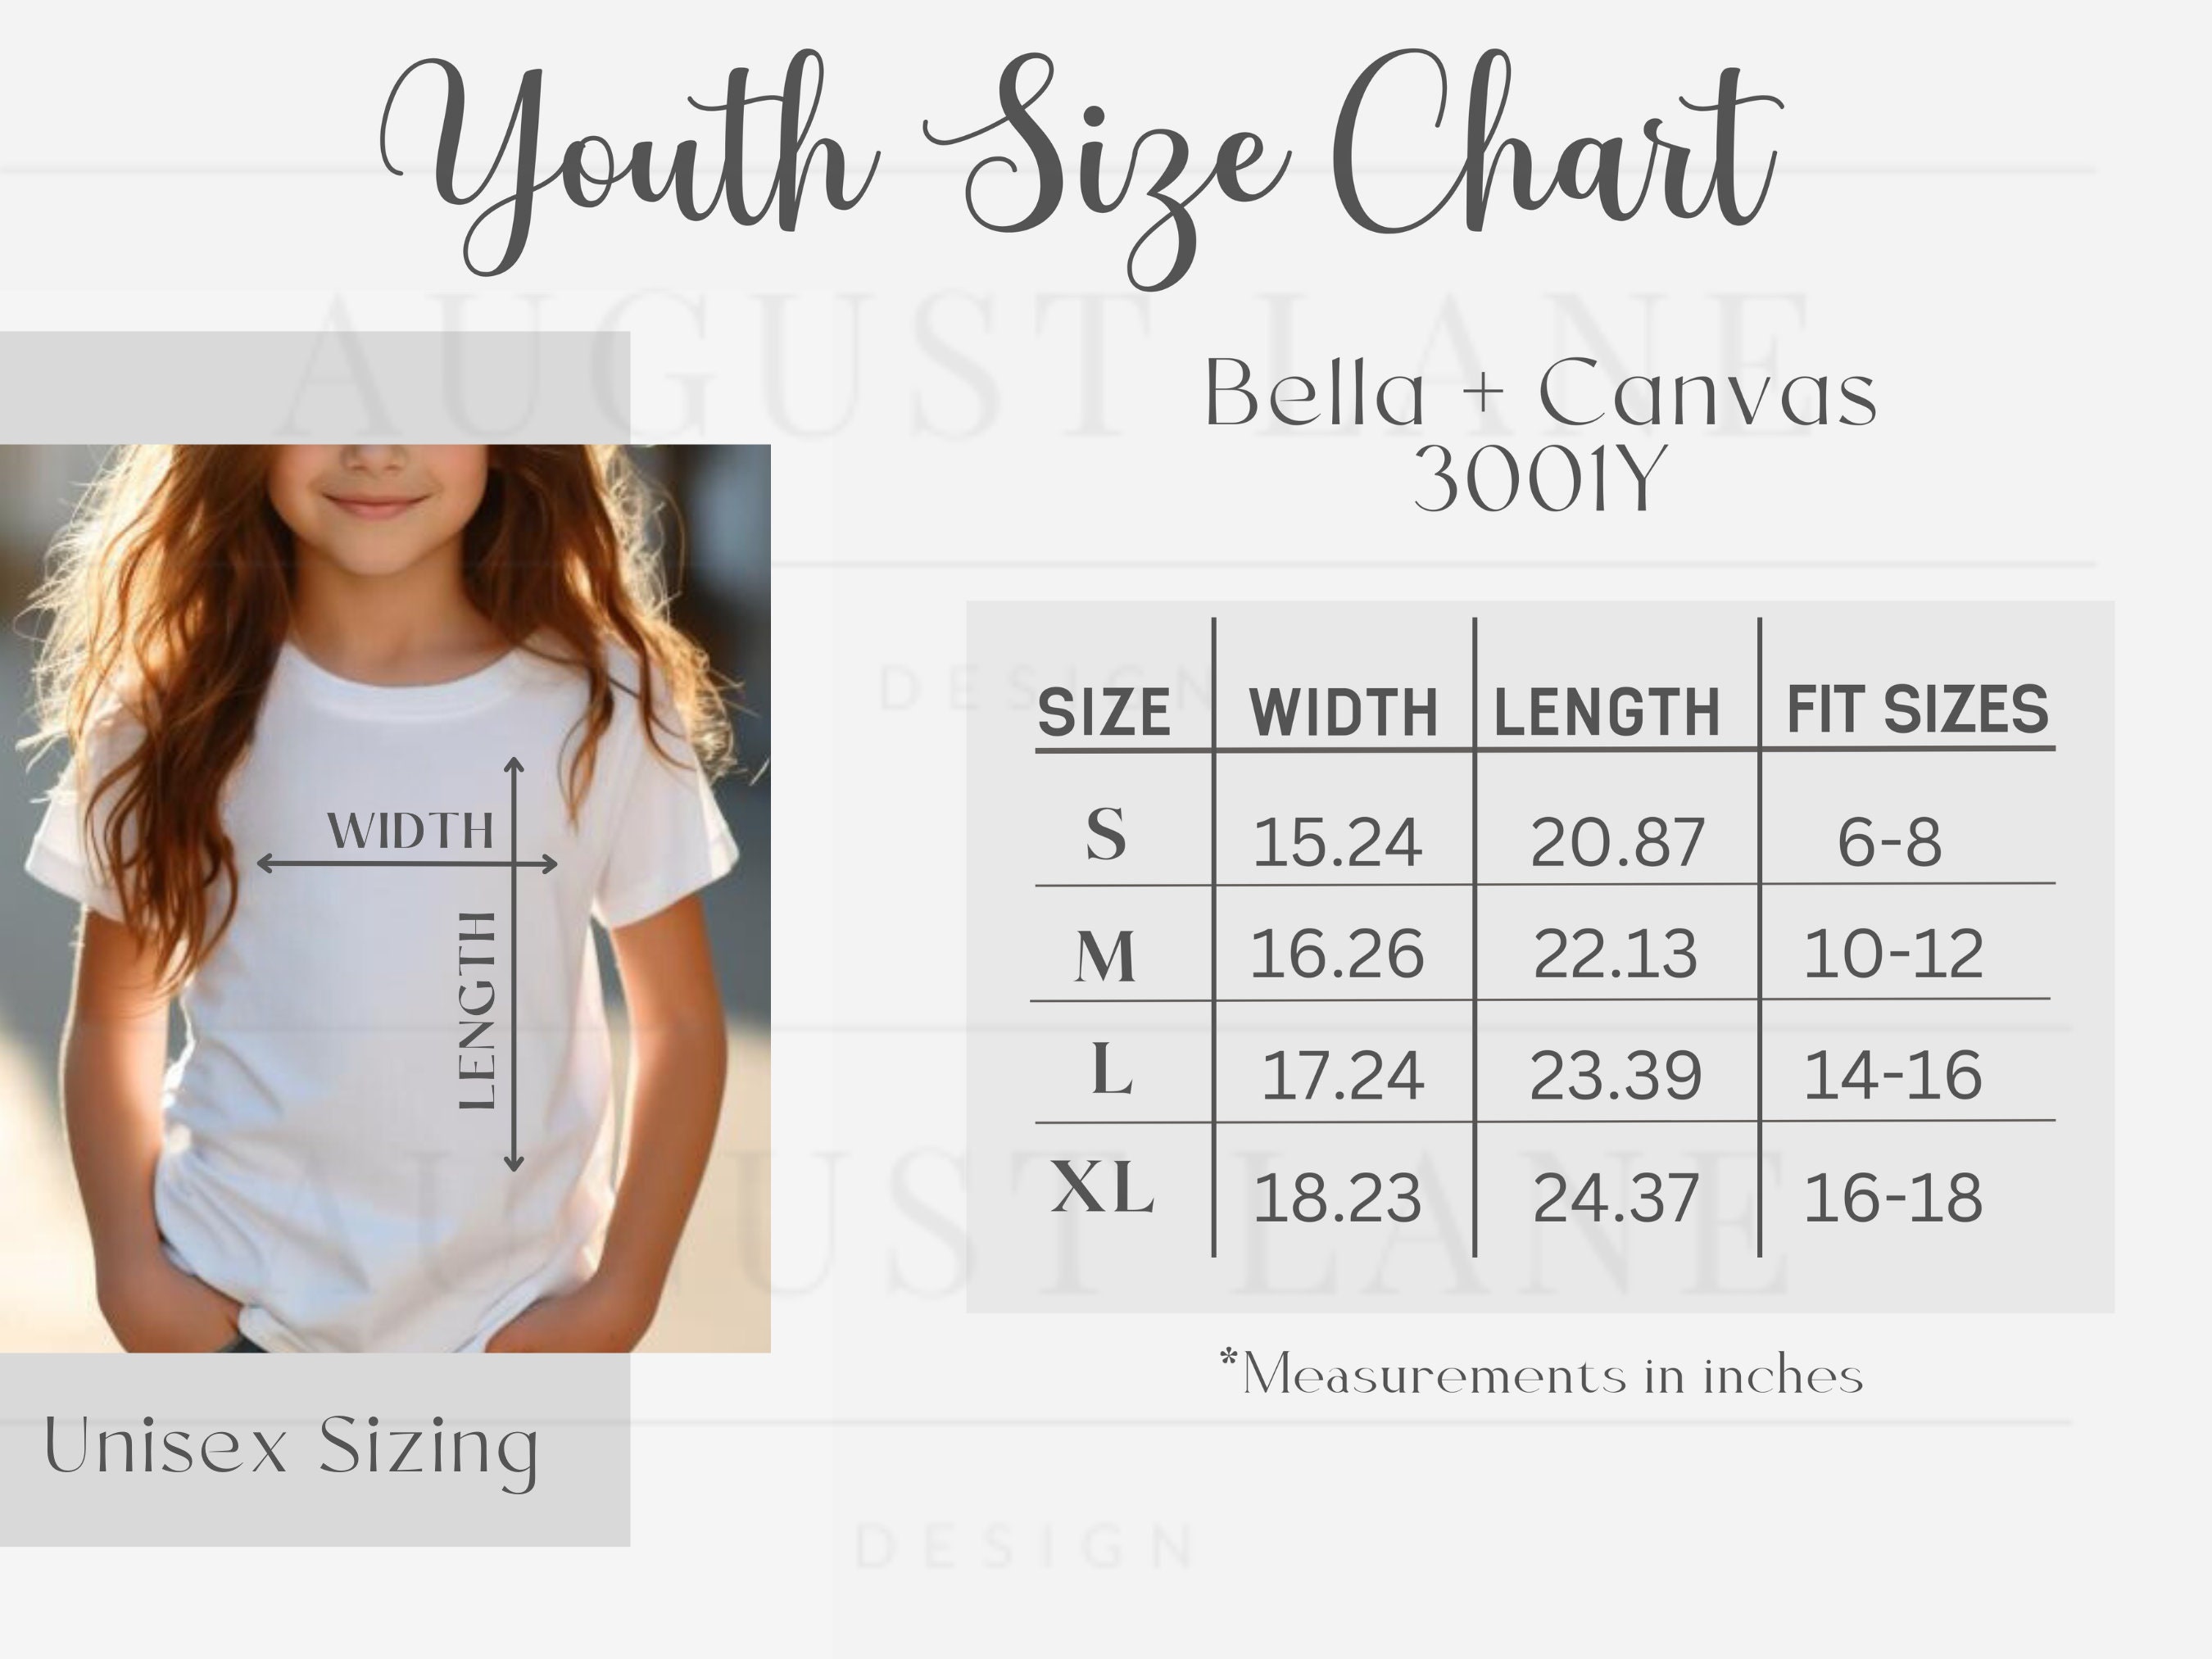 American Apparel 1301 Size Chart, Sizing Guide for Classic Adult Short  Sleeve Tee, JPG Design Template, T Shirt Mockup Gallery Photo